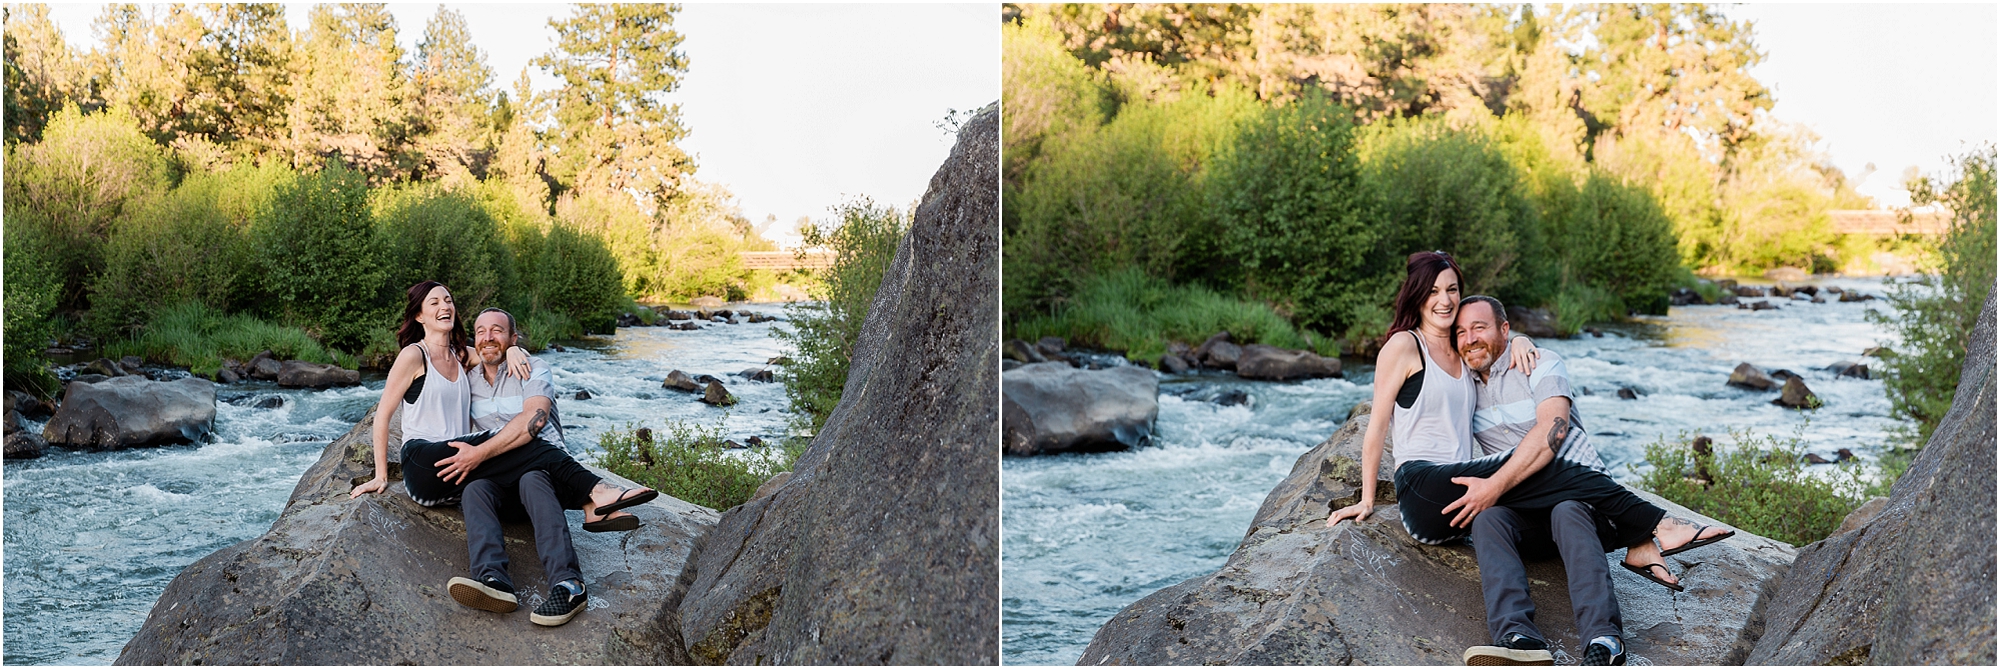 Getting silly at an engagement session along the river in Sawyer Park in Bend, OR. | Erica Swantek Photography